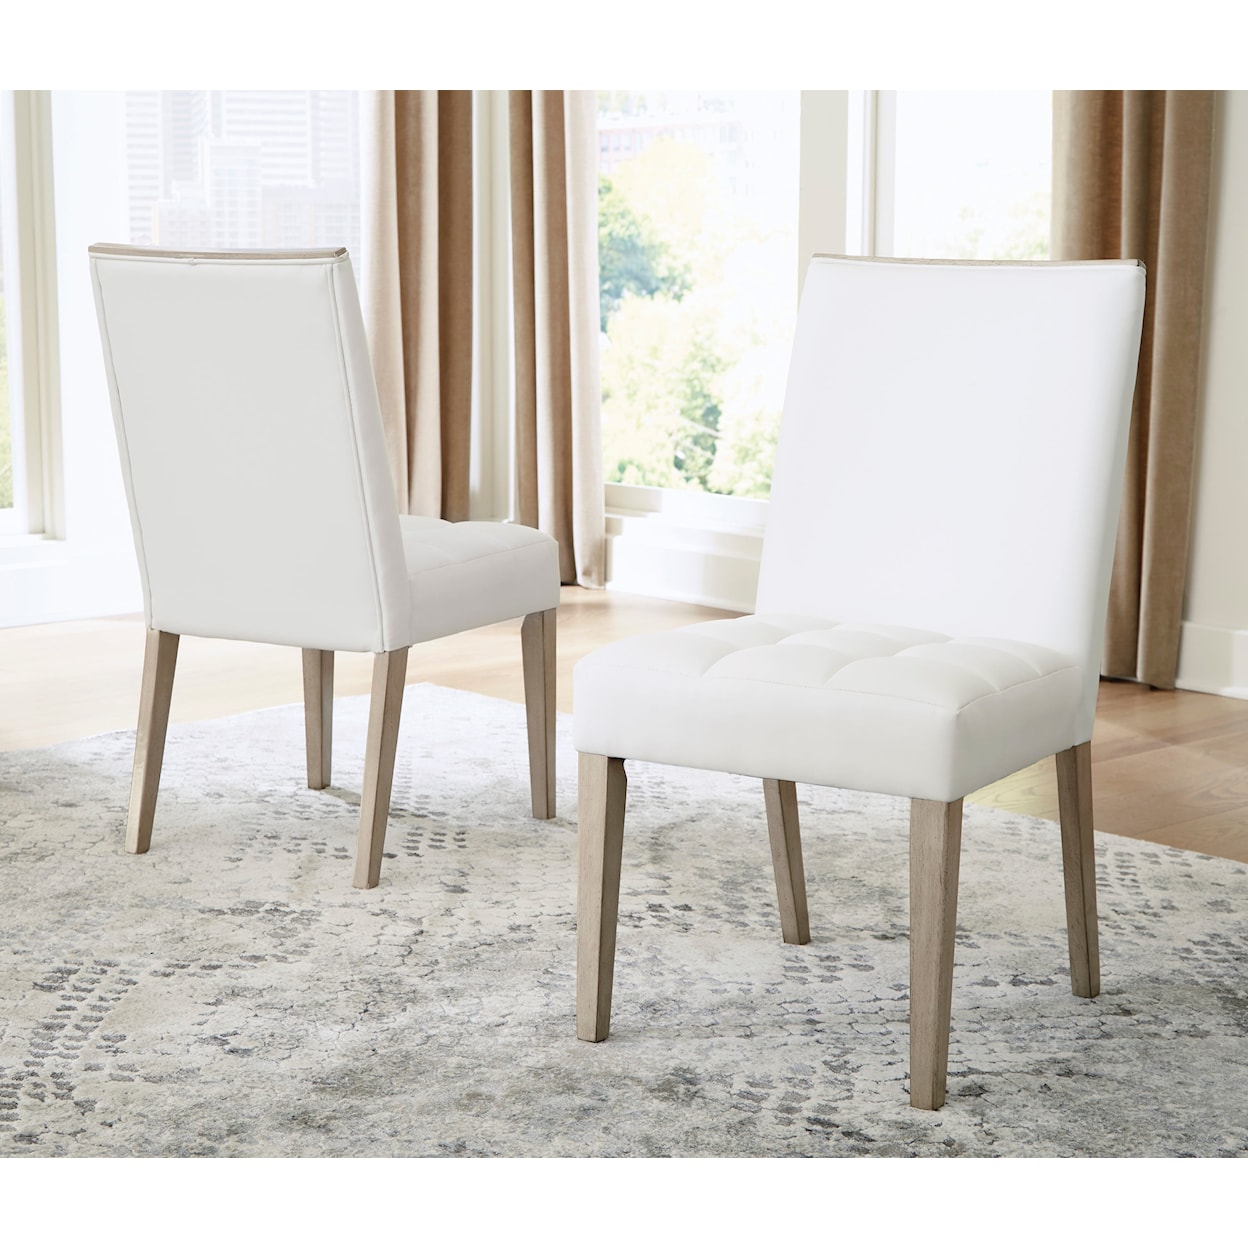 Signature Design by Ashley Wendora Dining Chair